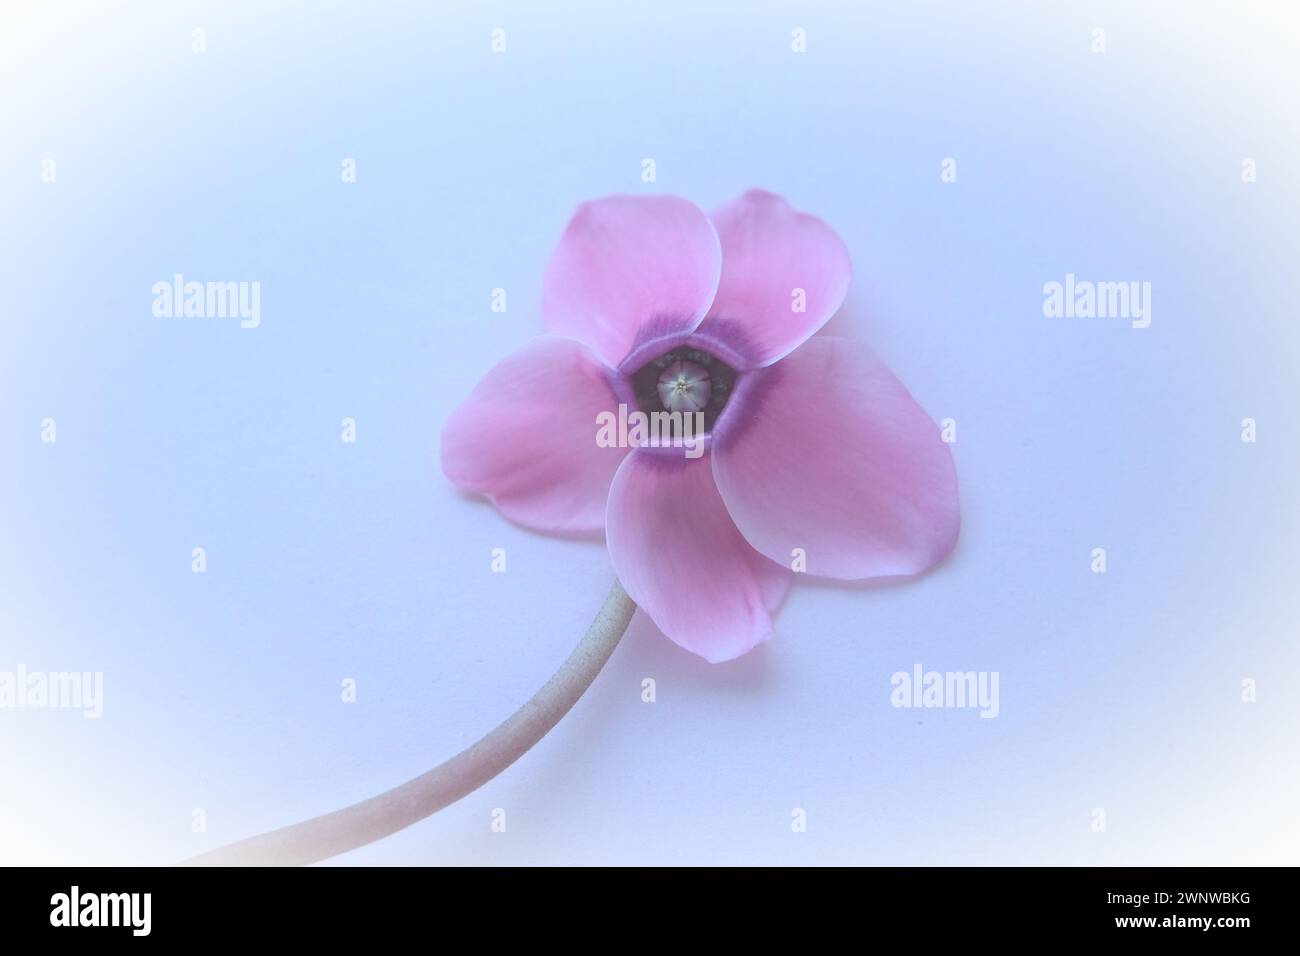 Pink cyclamen flower on a blue background with blurred gentle focus with white vignetting around the edges. One flower with five petals, stem without Stock Photo